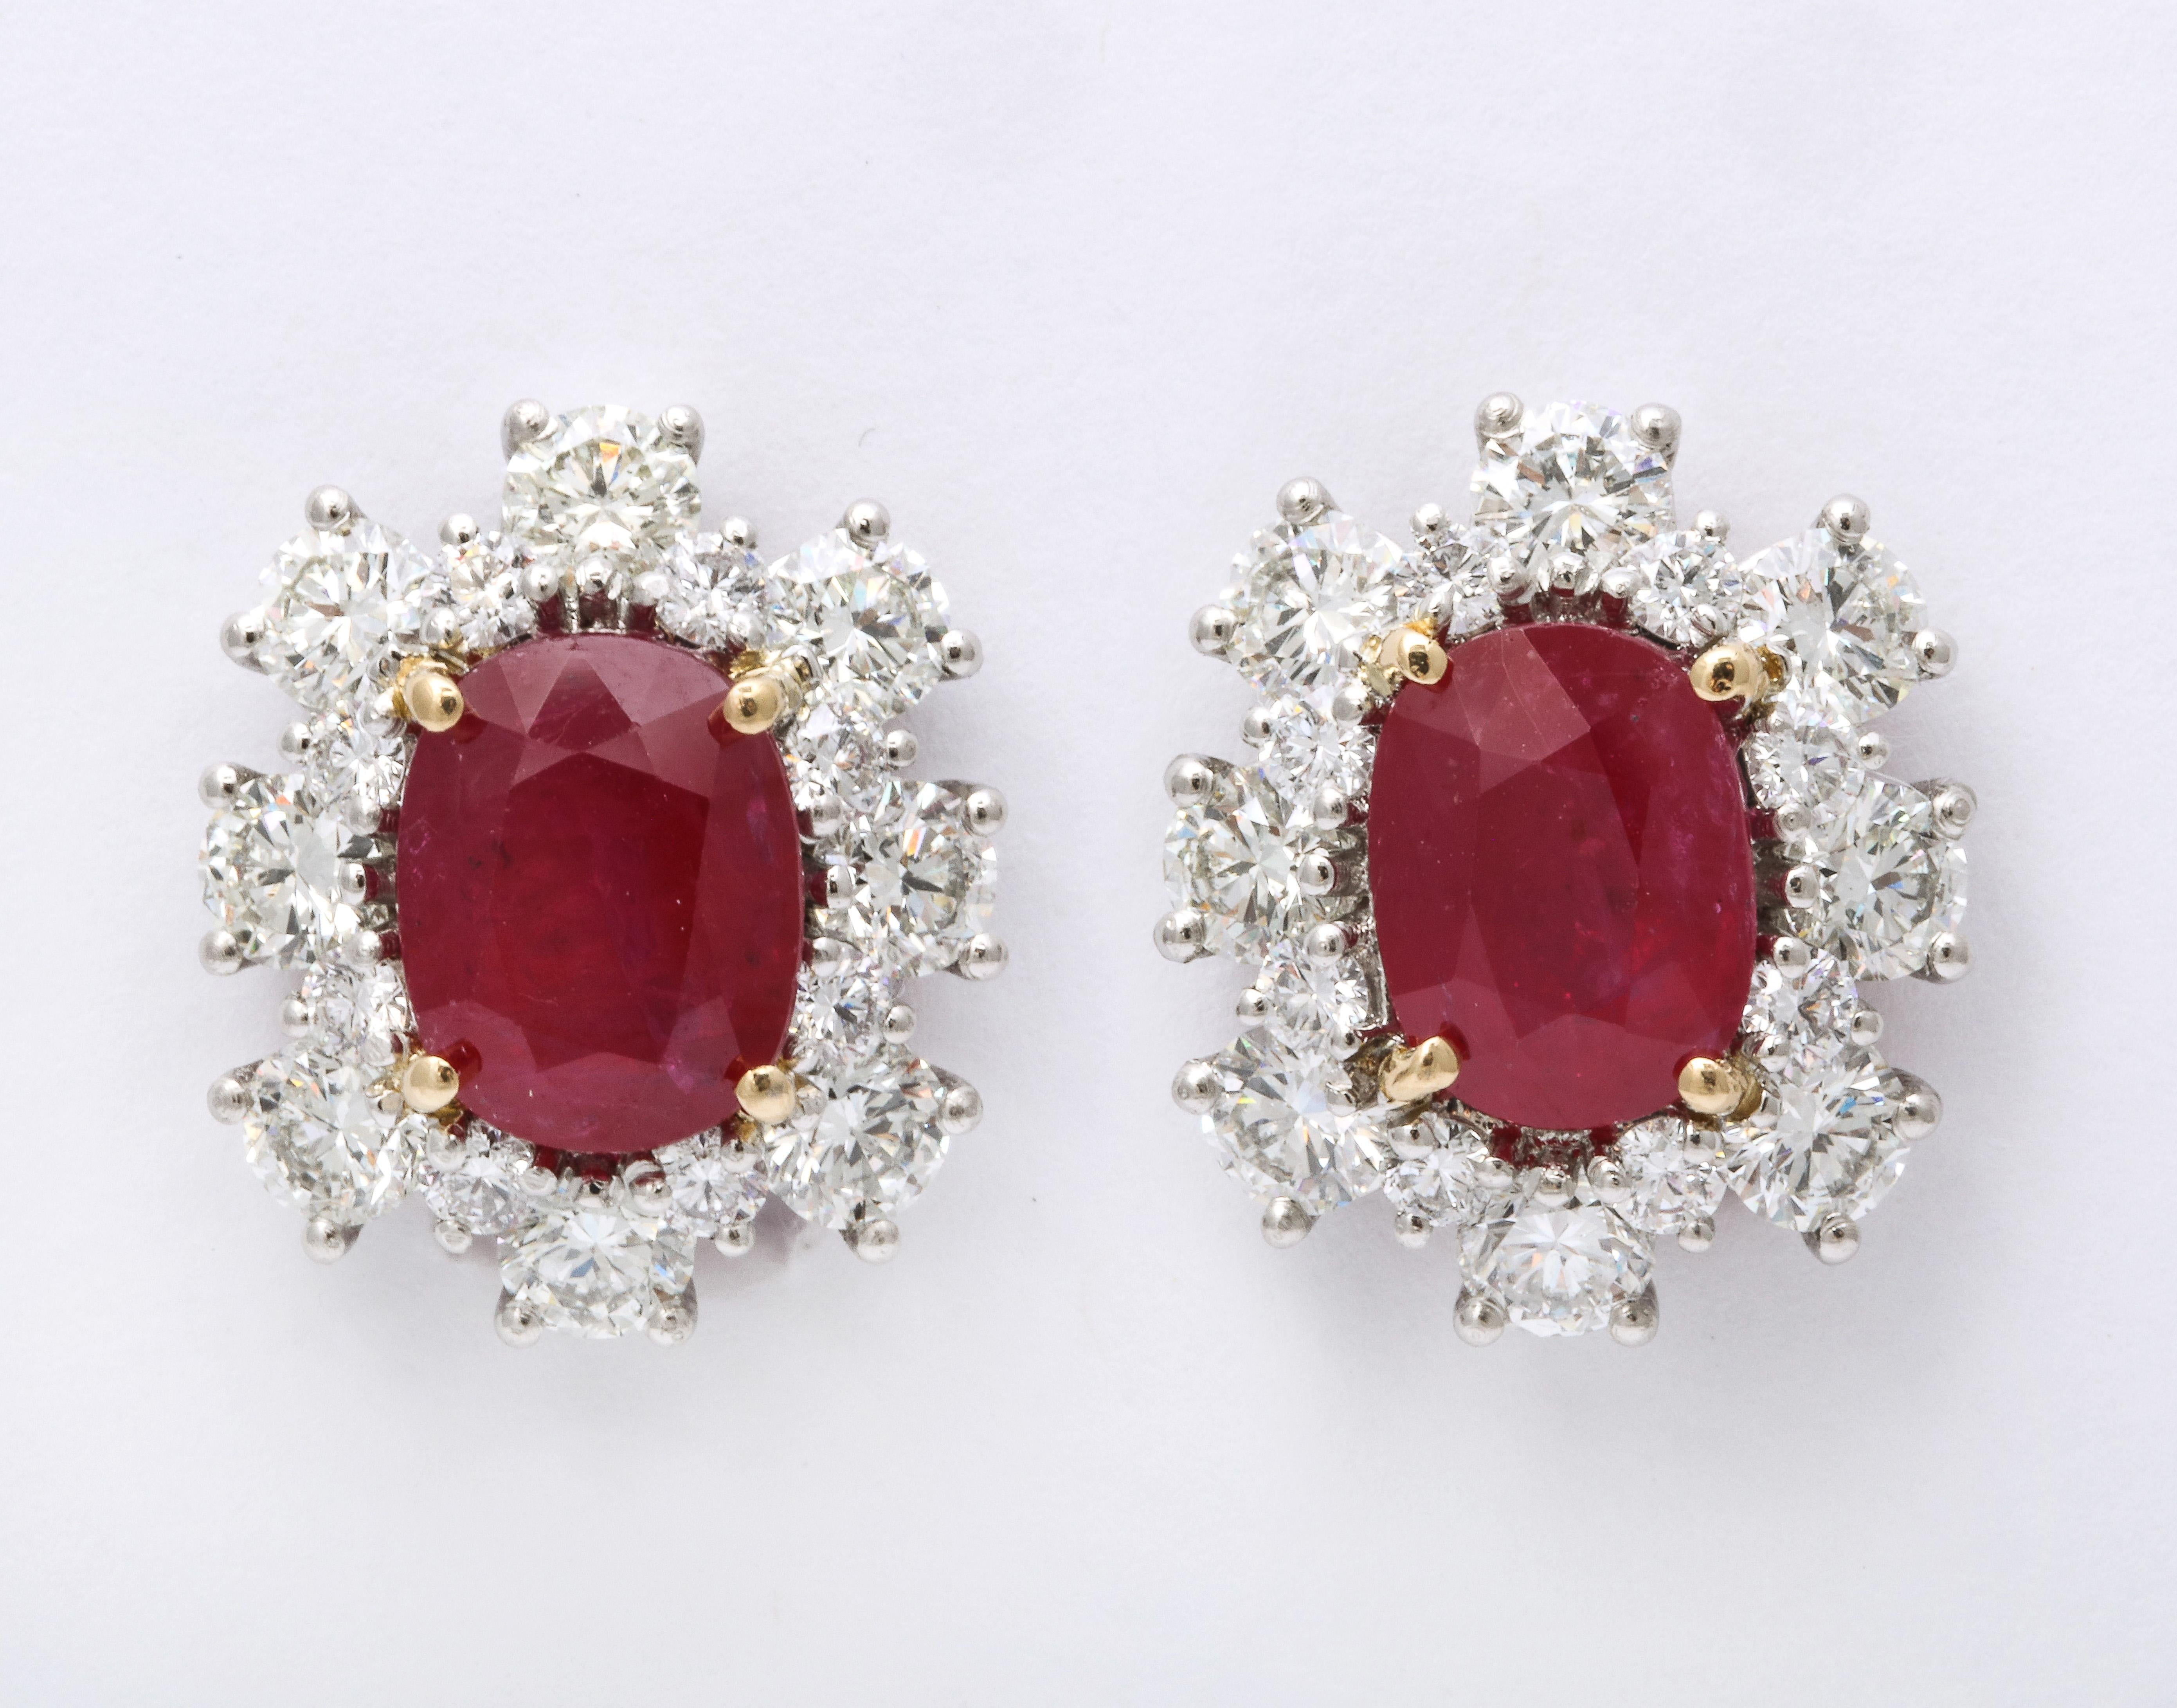 
An elegant pair of Ruby and Diamond Earrings 

7.47 carats of certified Intense Red oval Ruby 

4.89 carats of white round brilliant cut diamonds 

Set in 18k yellow gold and platinum. 

Approximately 3/4 of an inch long

A timeless pair of Ruby